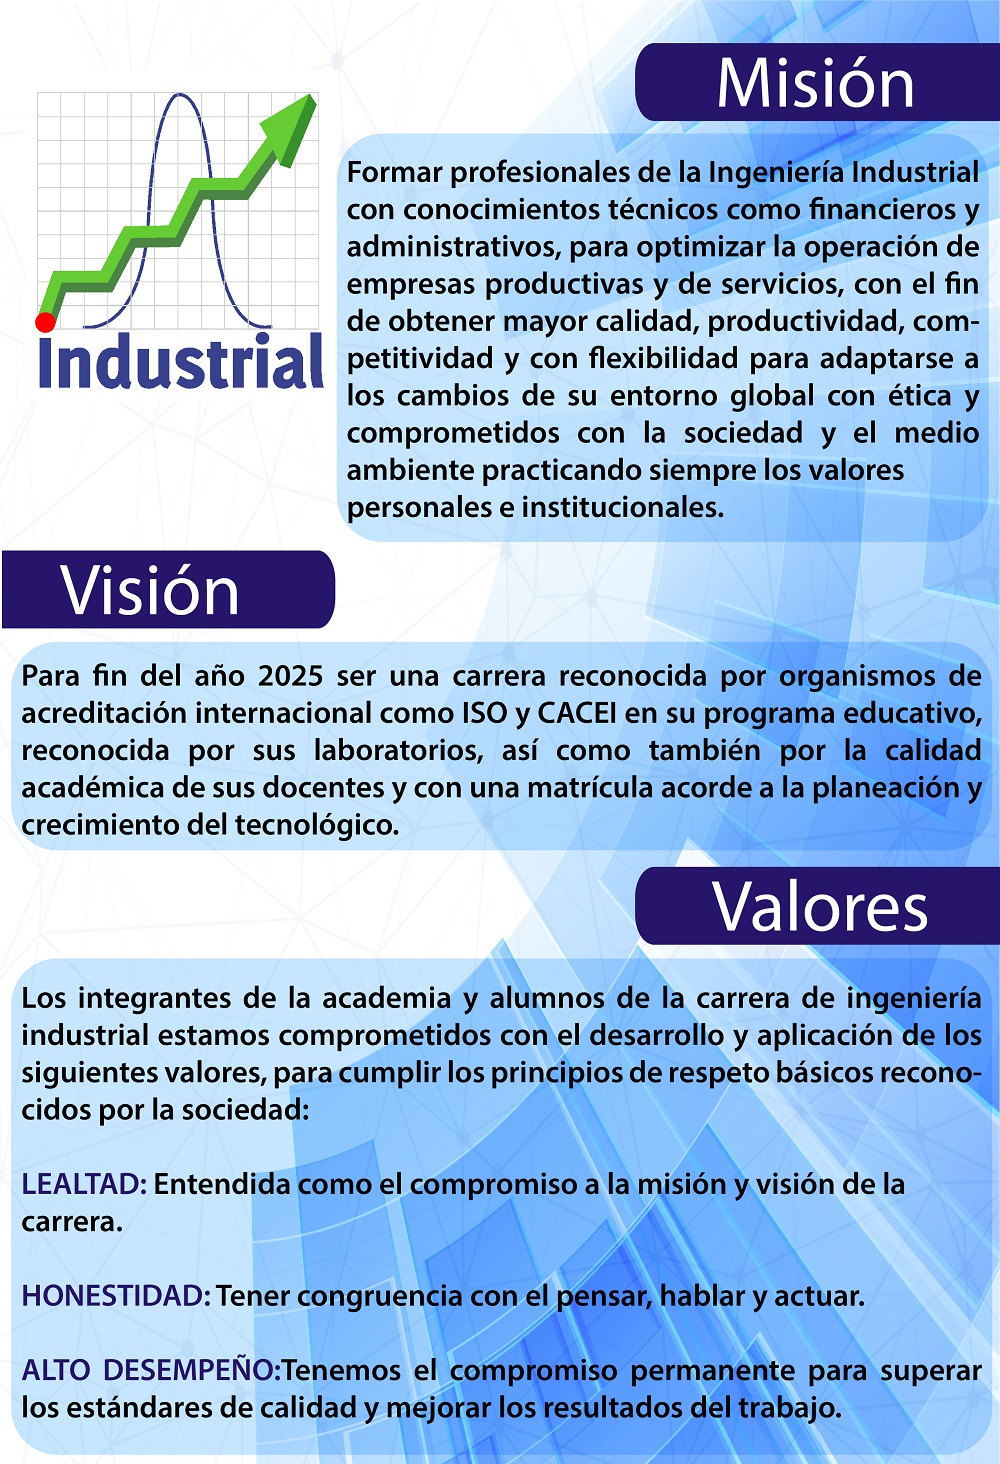 MISION_VISION_VALORES_ING INDUSTRIAL